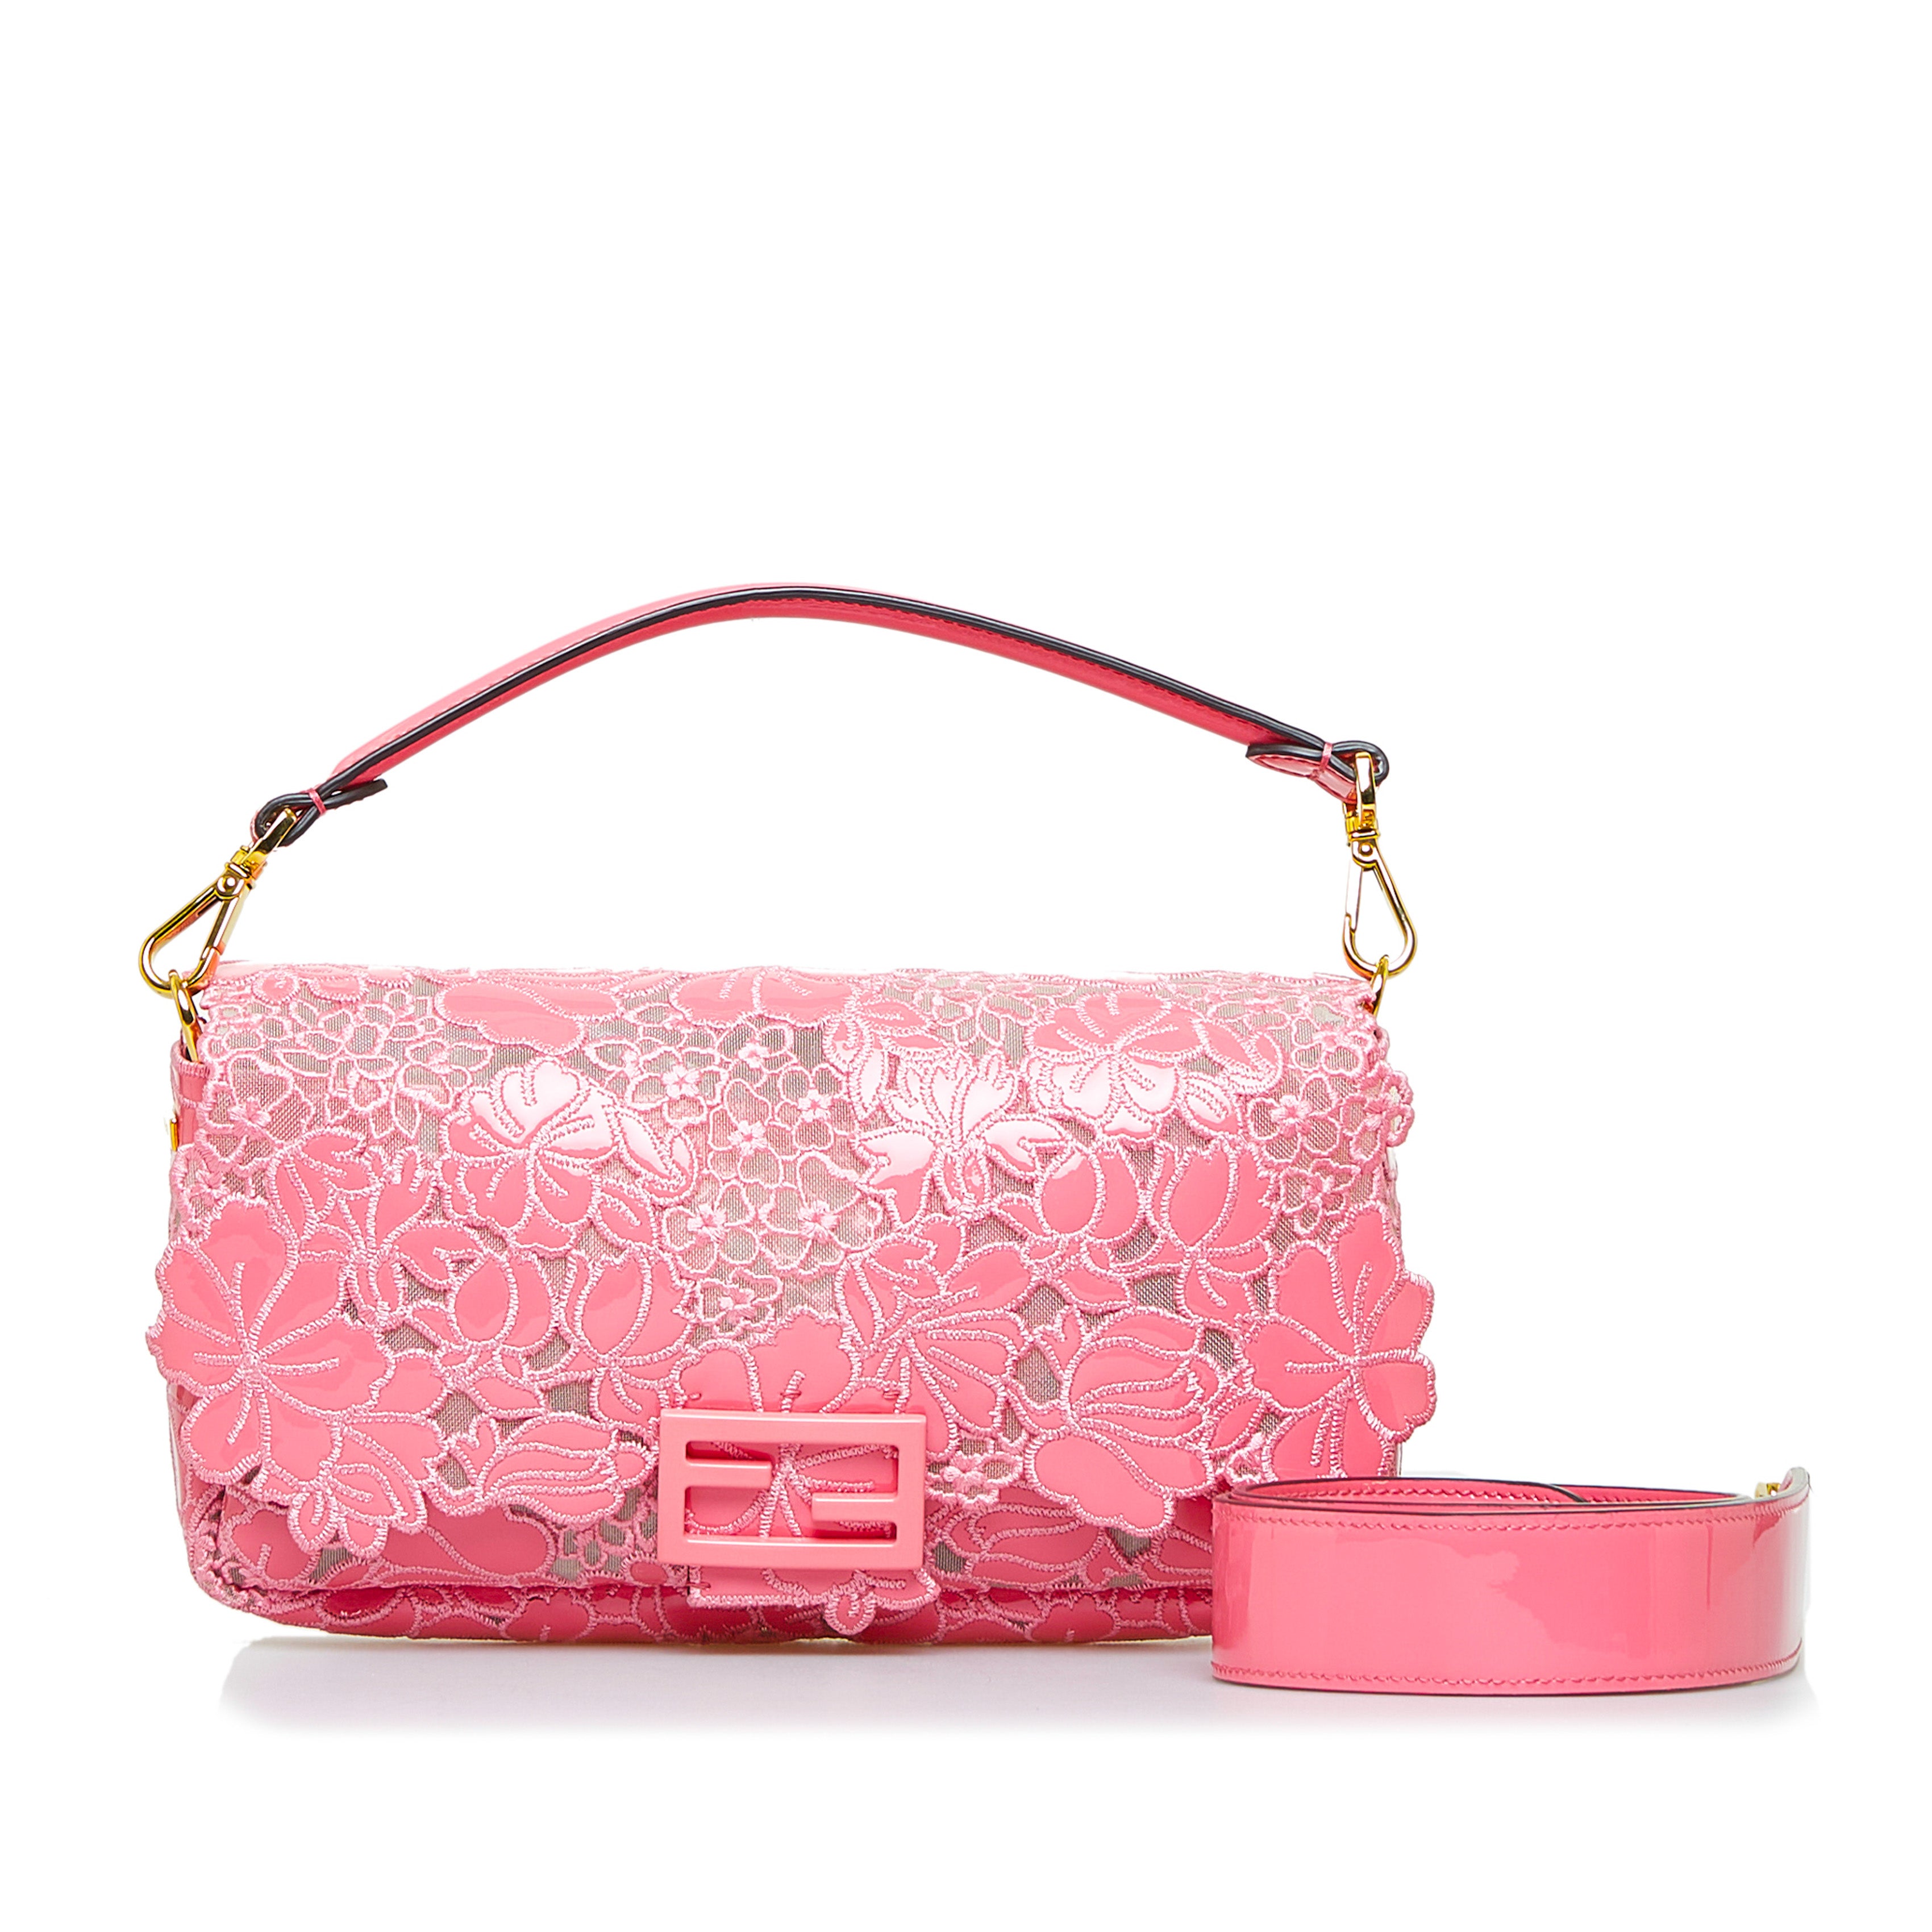 FENDI Fendi Baguette Embroidered Lace Pink Patent Leather - Vault 55